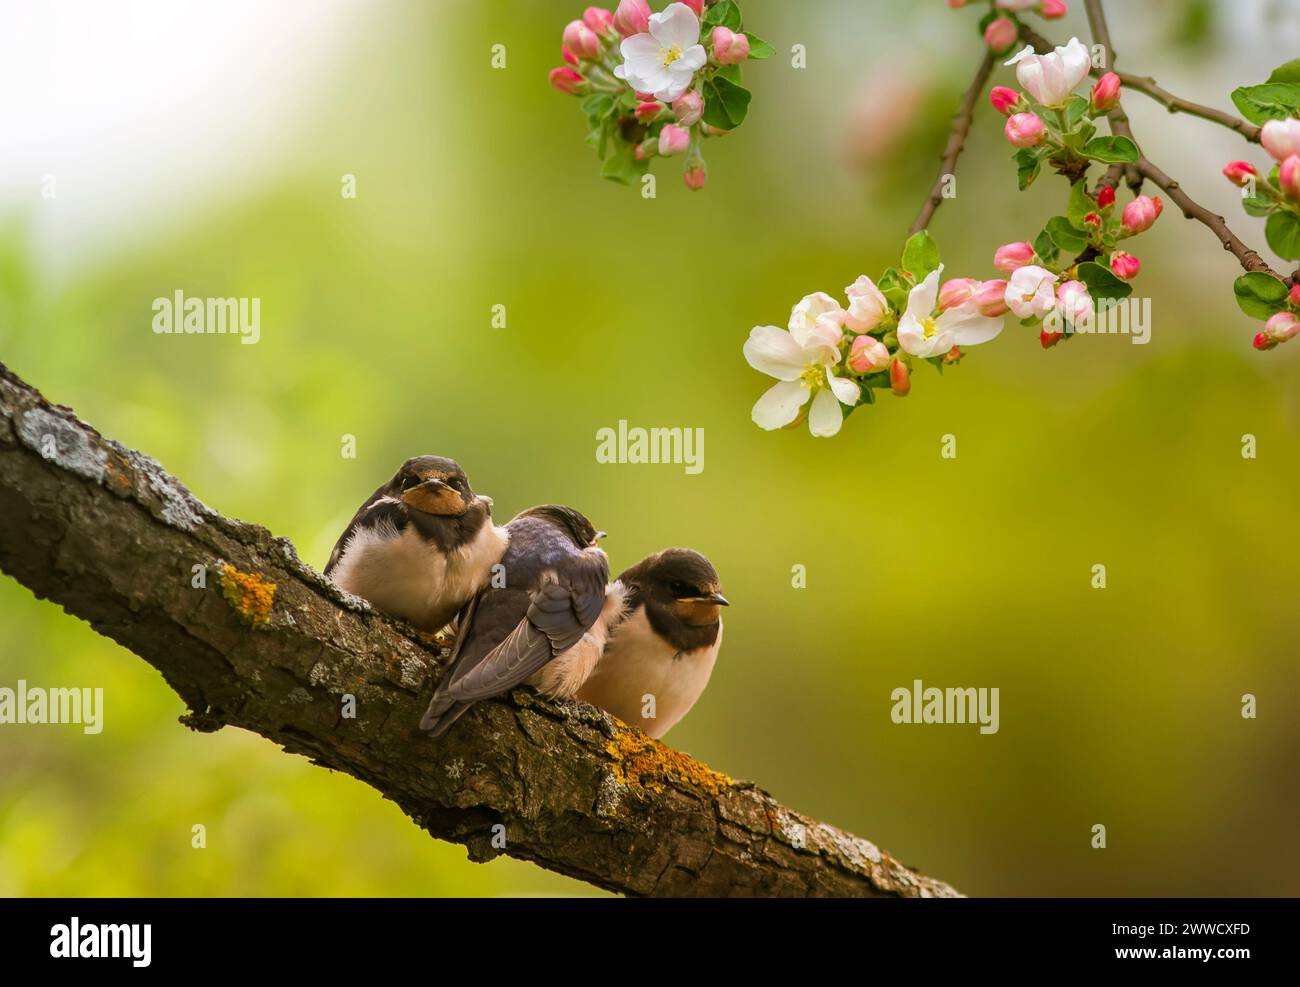 three village swallow chicks sit among the rosy flowering branches of an apple tree Stock Photo